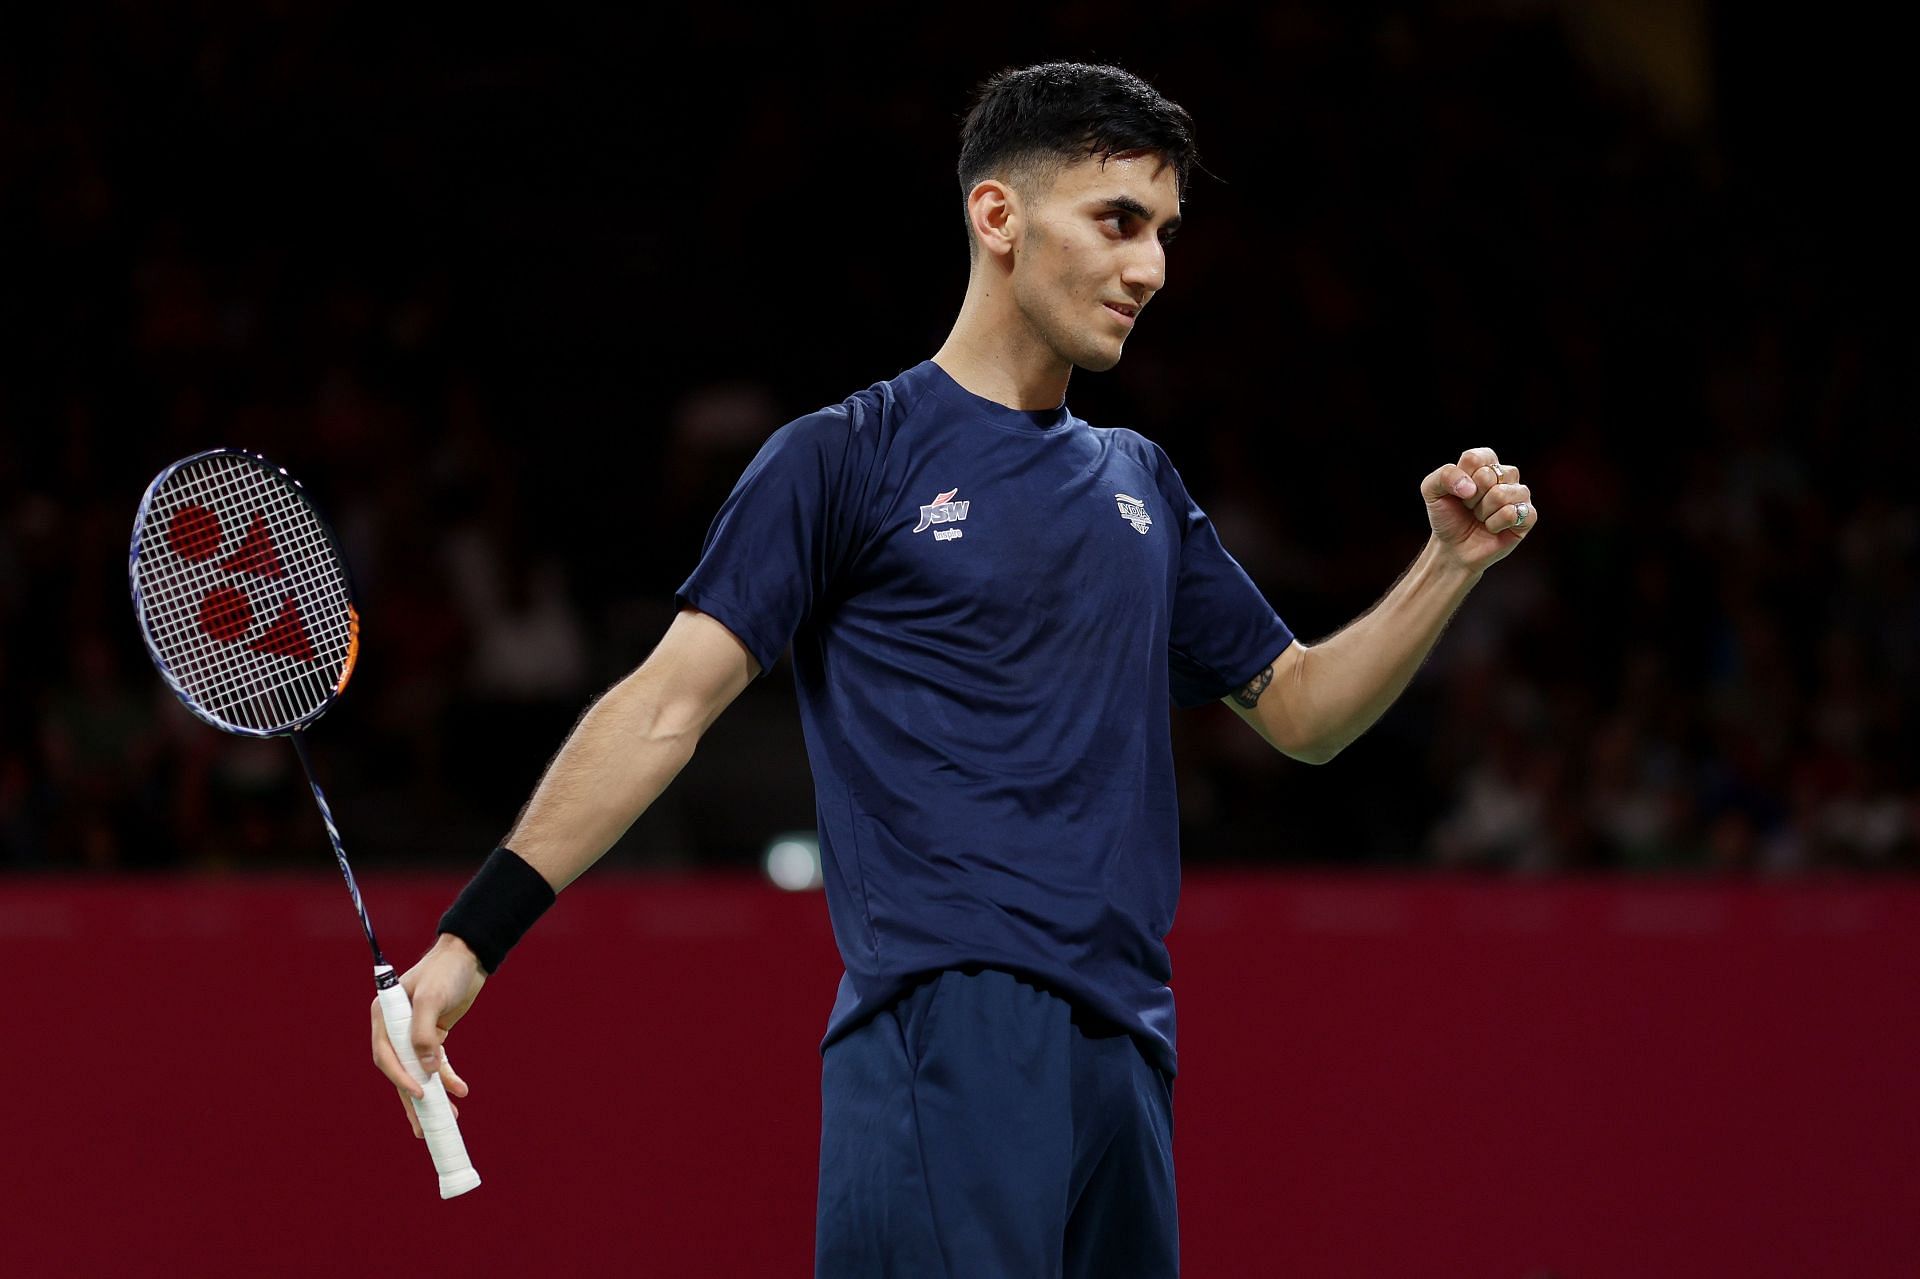 French Open 2022 Full list of Indian shuttlers playing, schedule, where to watch and live streaming details